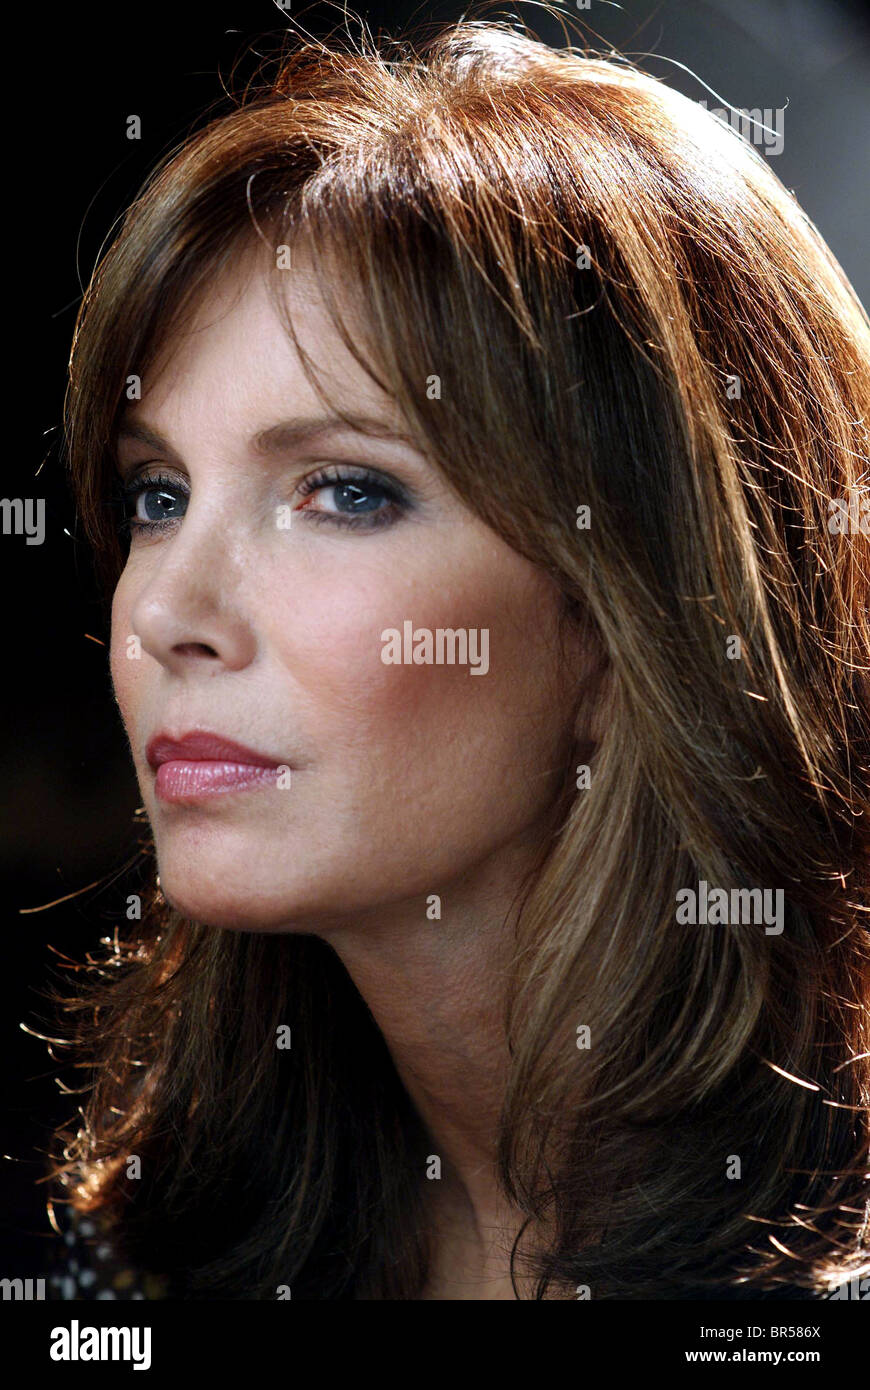 Jaclyn images smith of Jaclyn Smith,